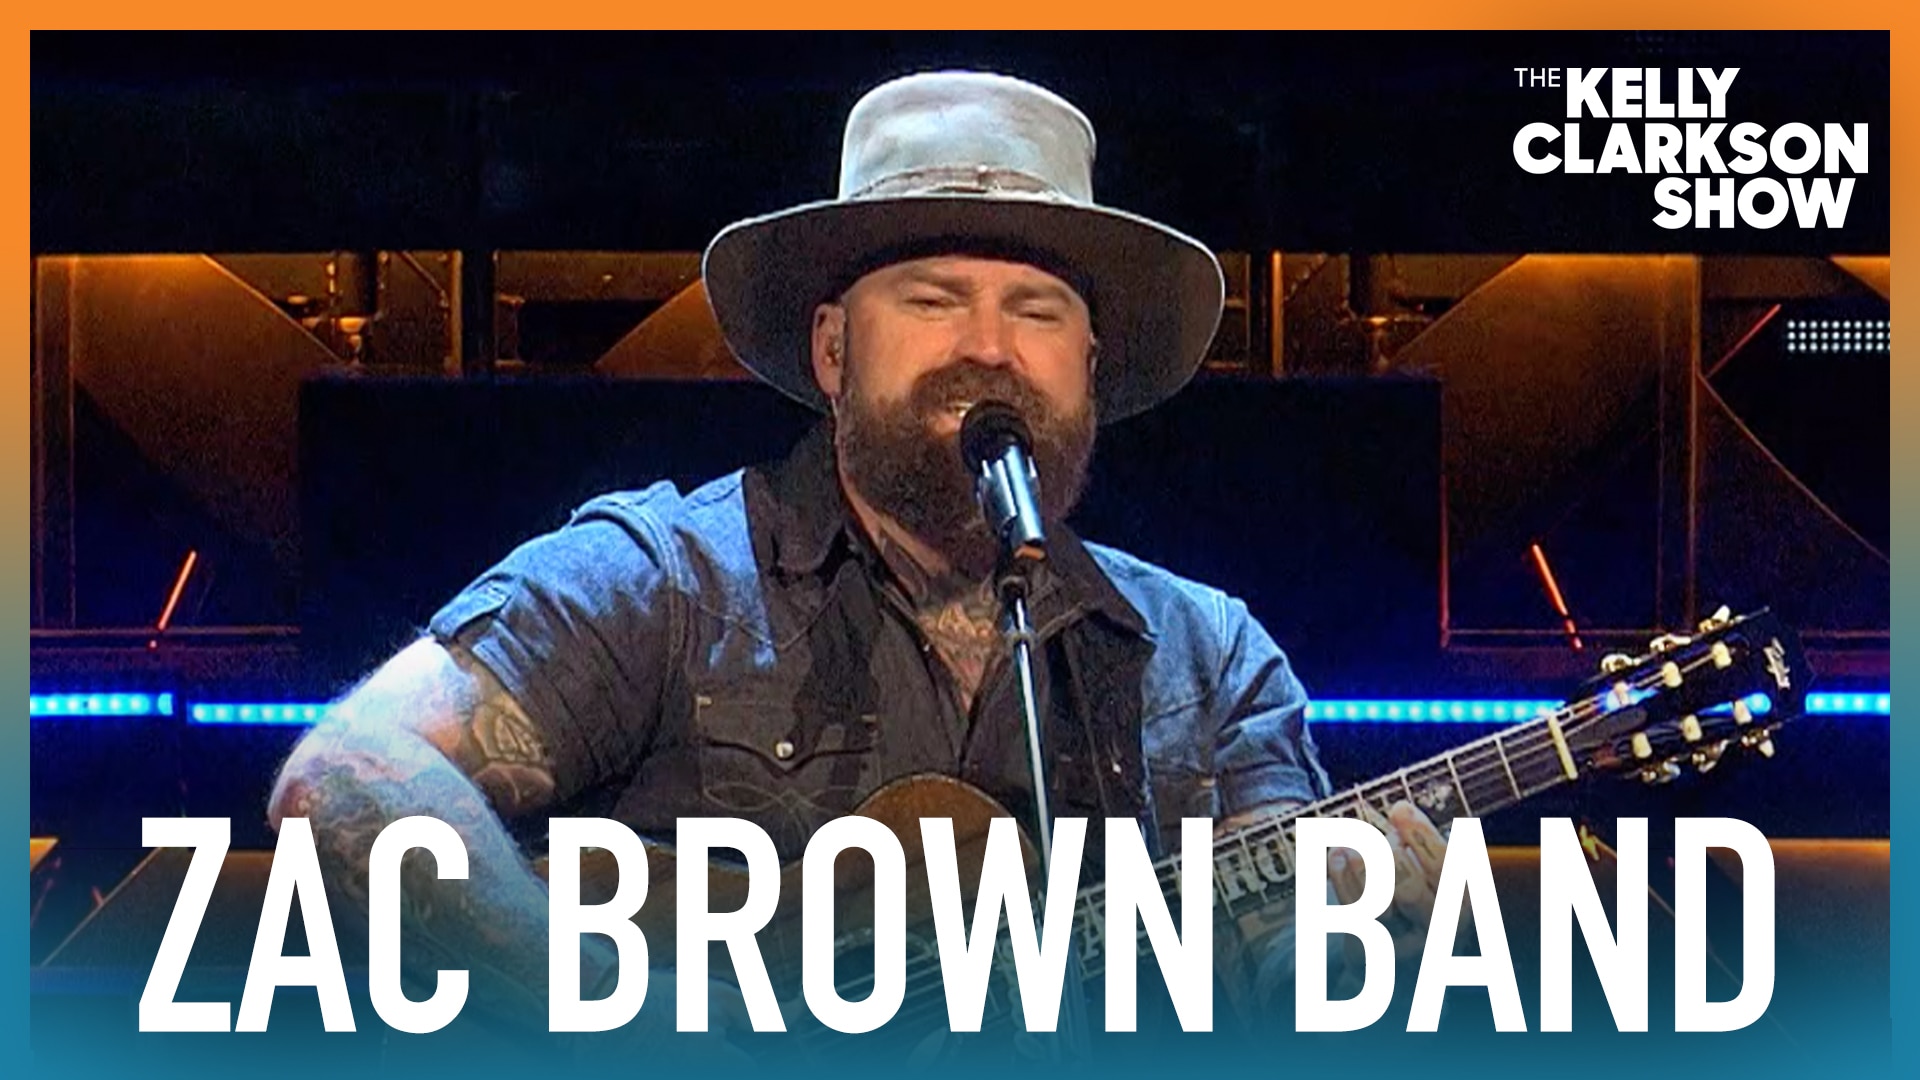 Watch The Kelly Clarkson Show Official Website Highlight Zac Brown